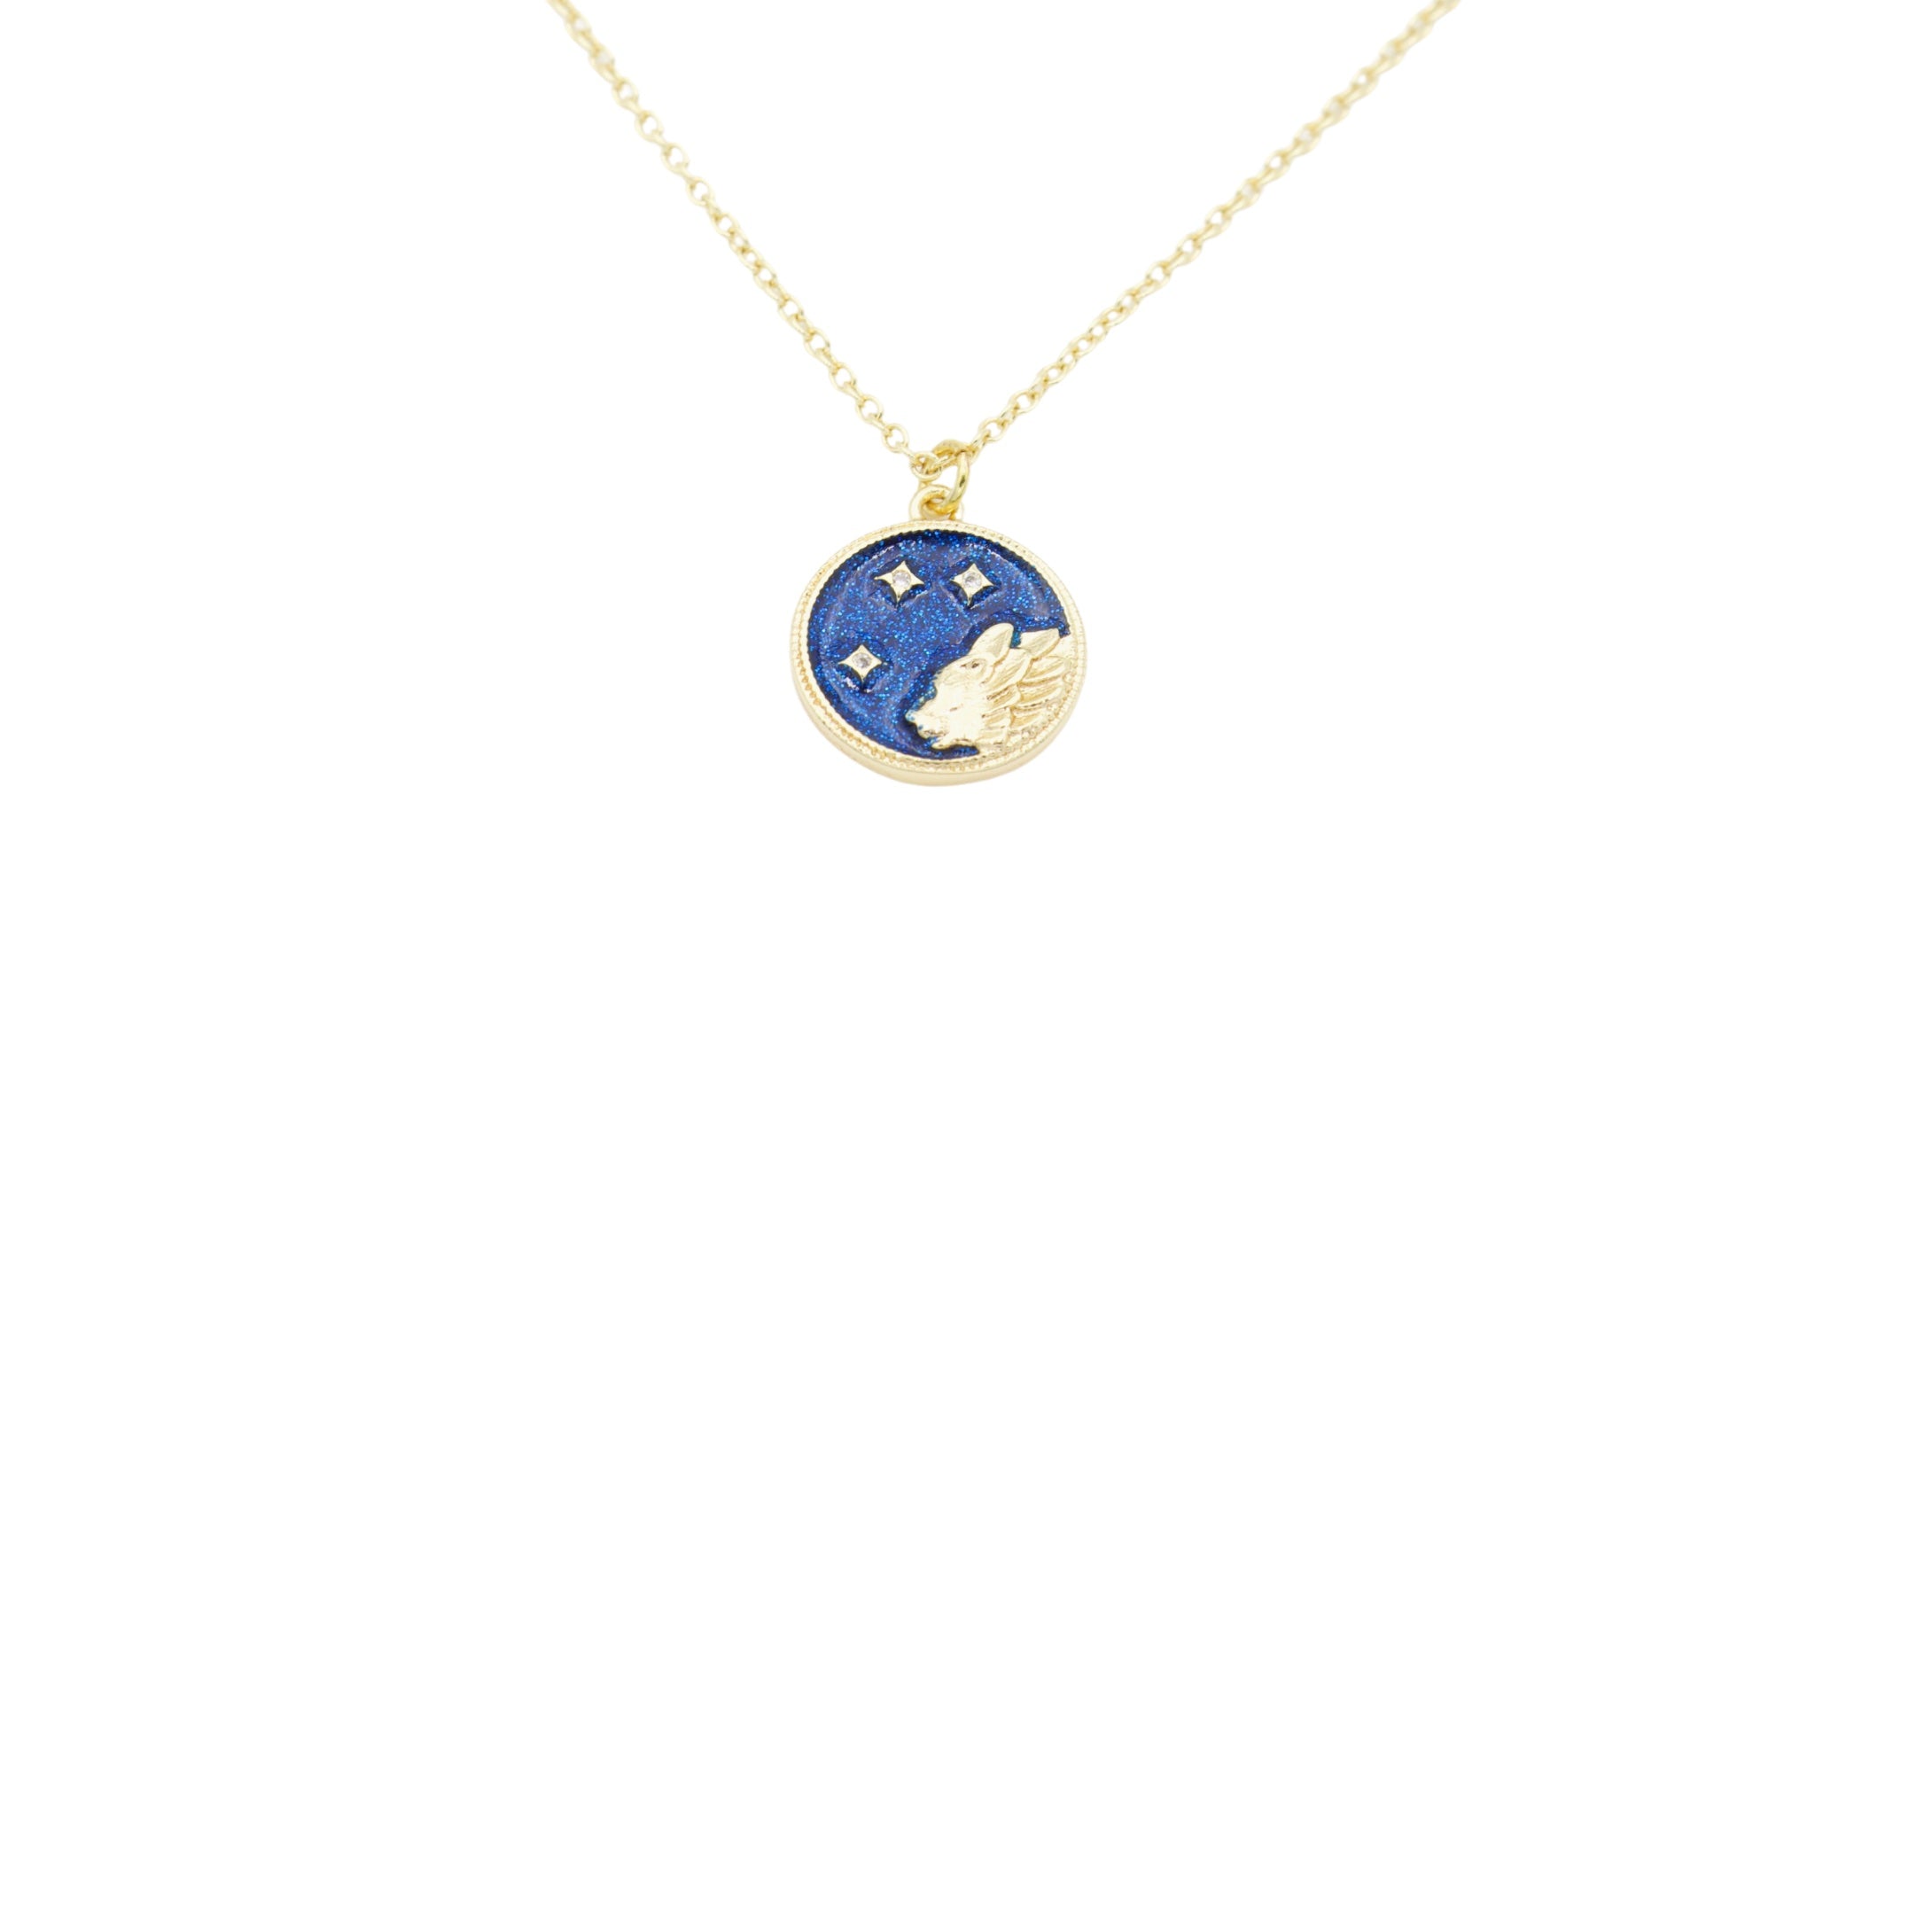 AW Boutique's Zodiac Astro Coin is a dainty pendant full of sparkle and shine.  This piece adds a pop of colour to your everyday wear and at 18 inches is a great length to mix and layer your other chains with.  Proudly wear either your own star sign or the star sign of a loved one close to your heart.  Zodiac shown is Leo.